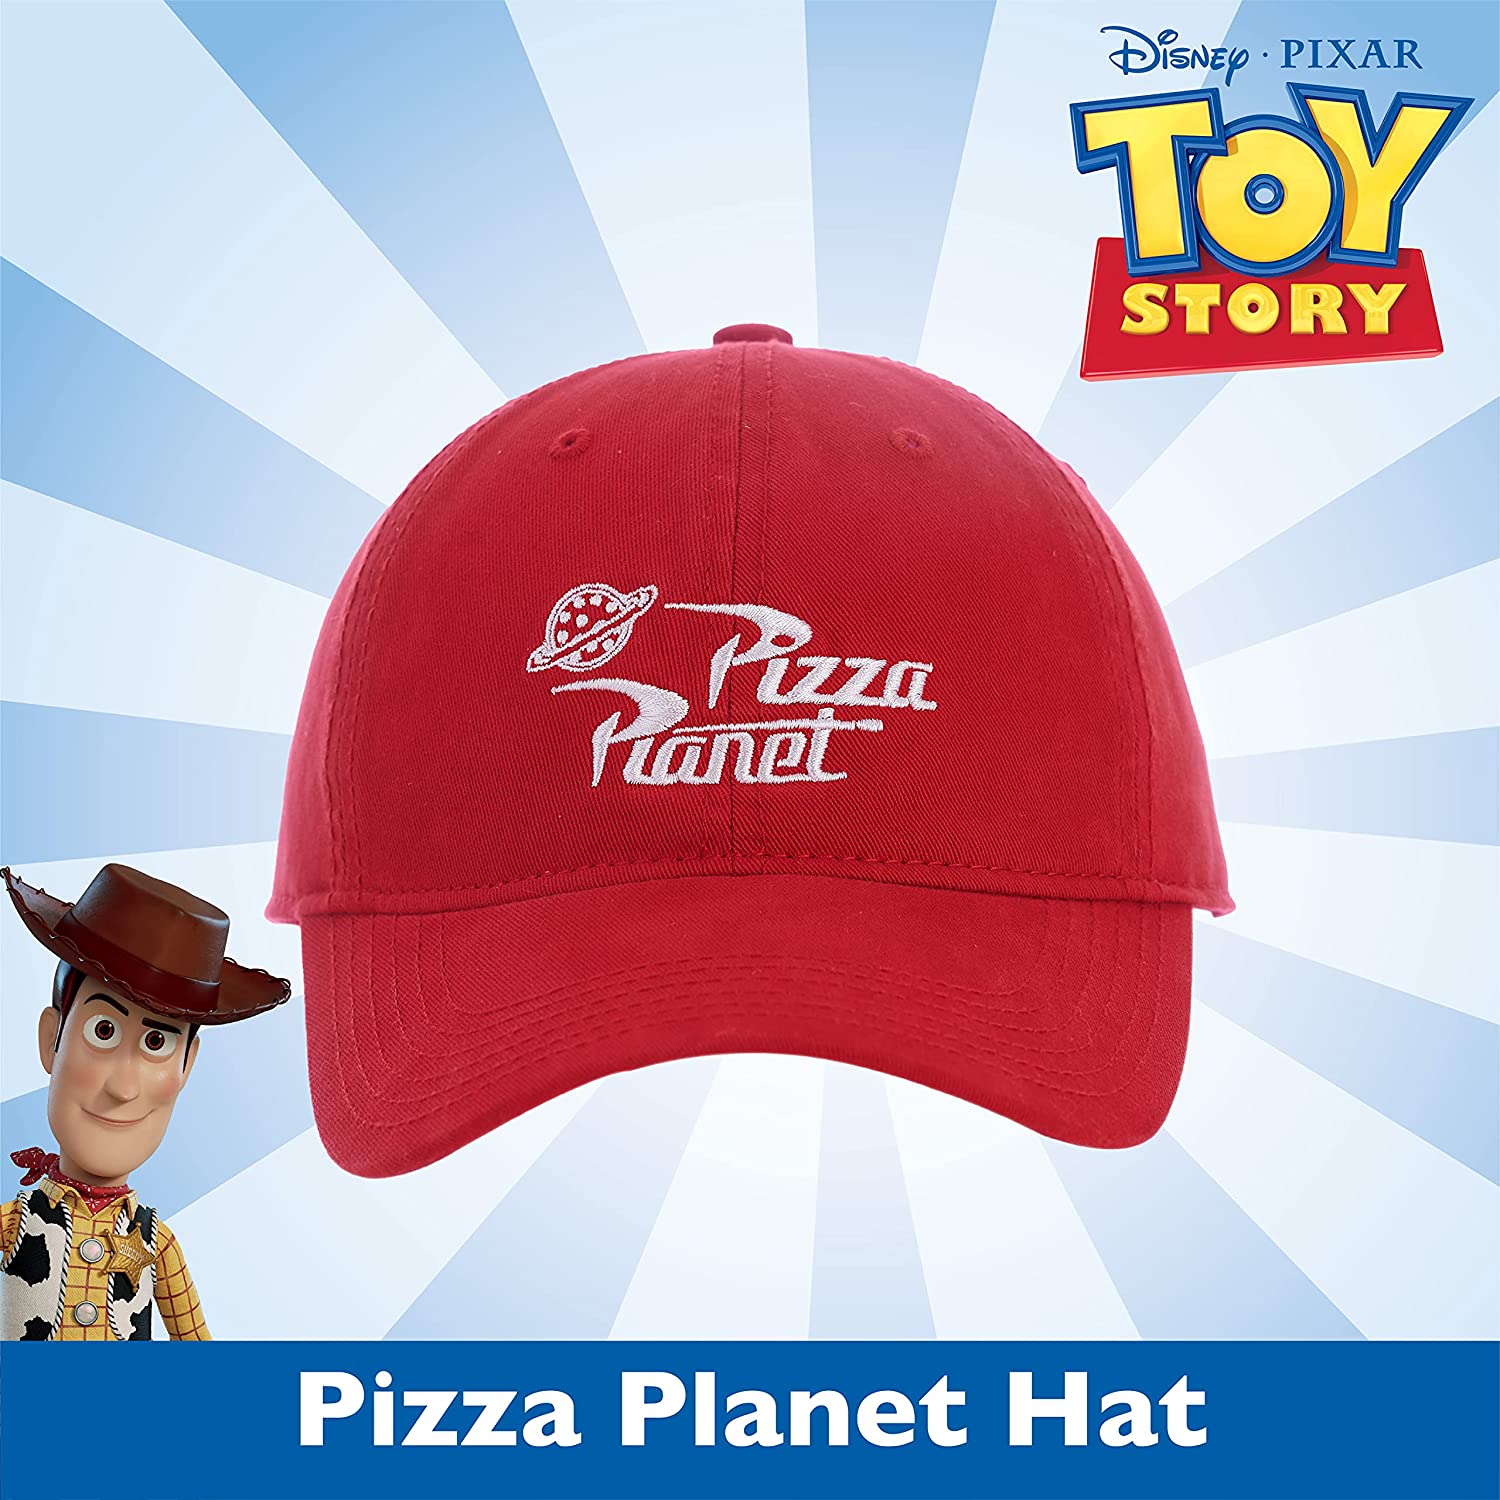 Concept One Disney Pixar Toy Story Pizza Planet Delivery Embroidered Logo Cotton Adjustable Baseball Cap with Curved Brim, Red, Medium